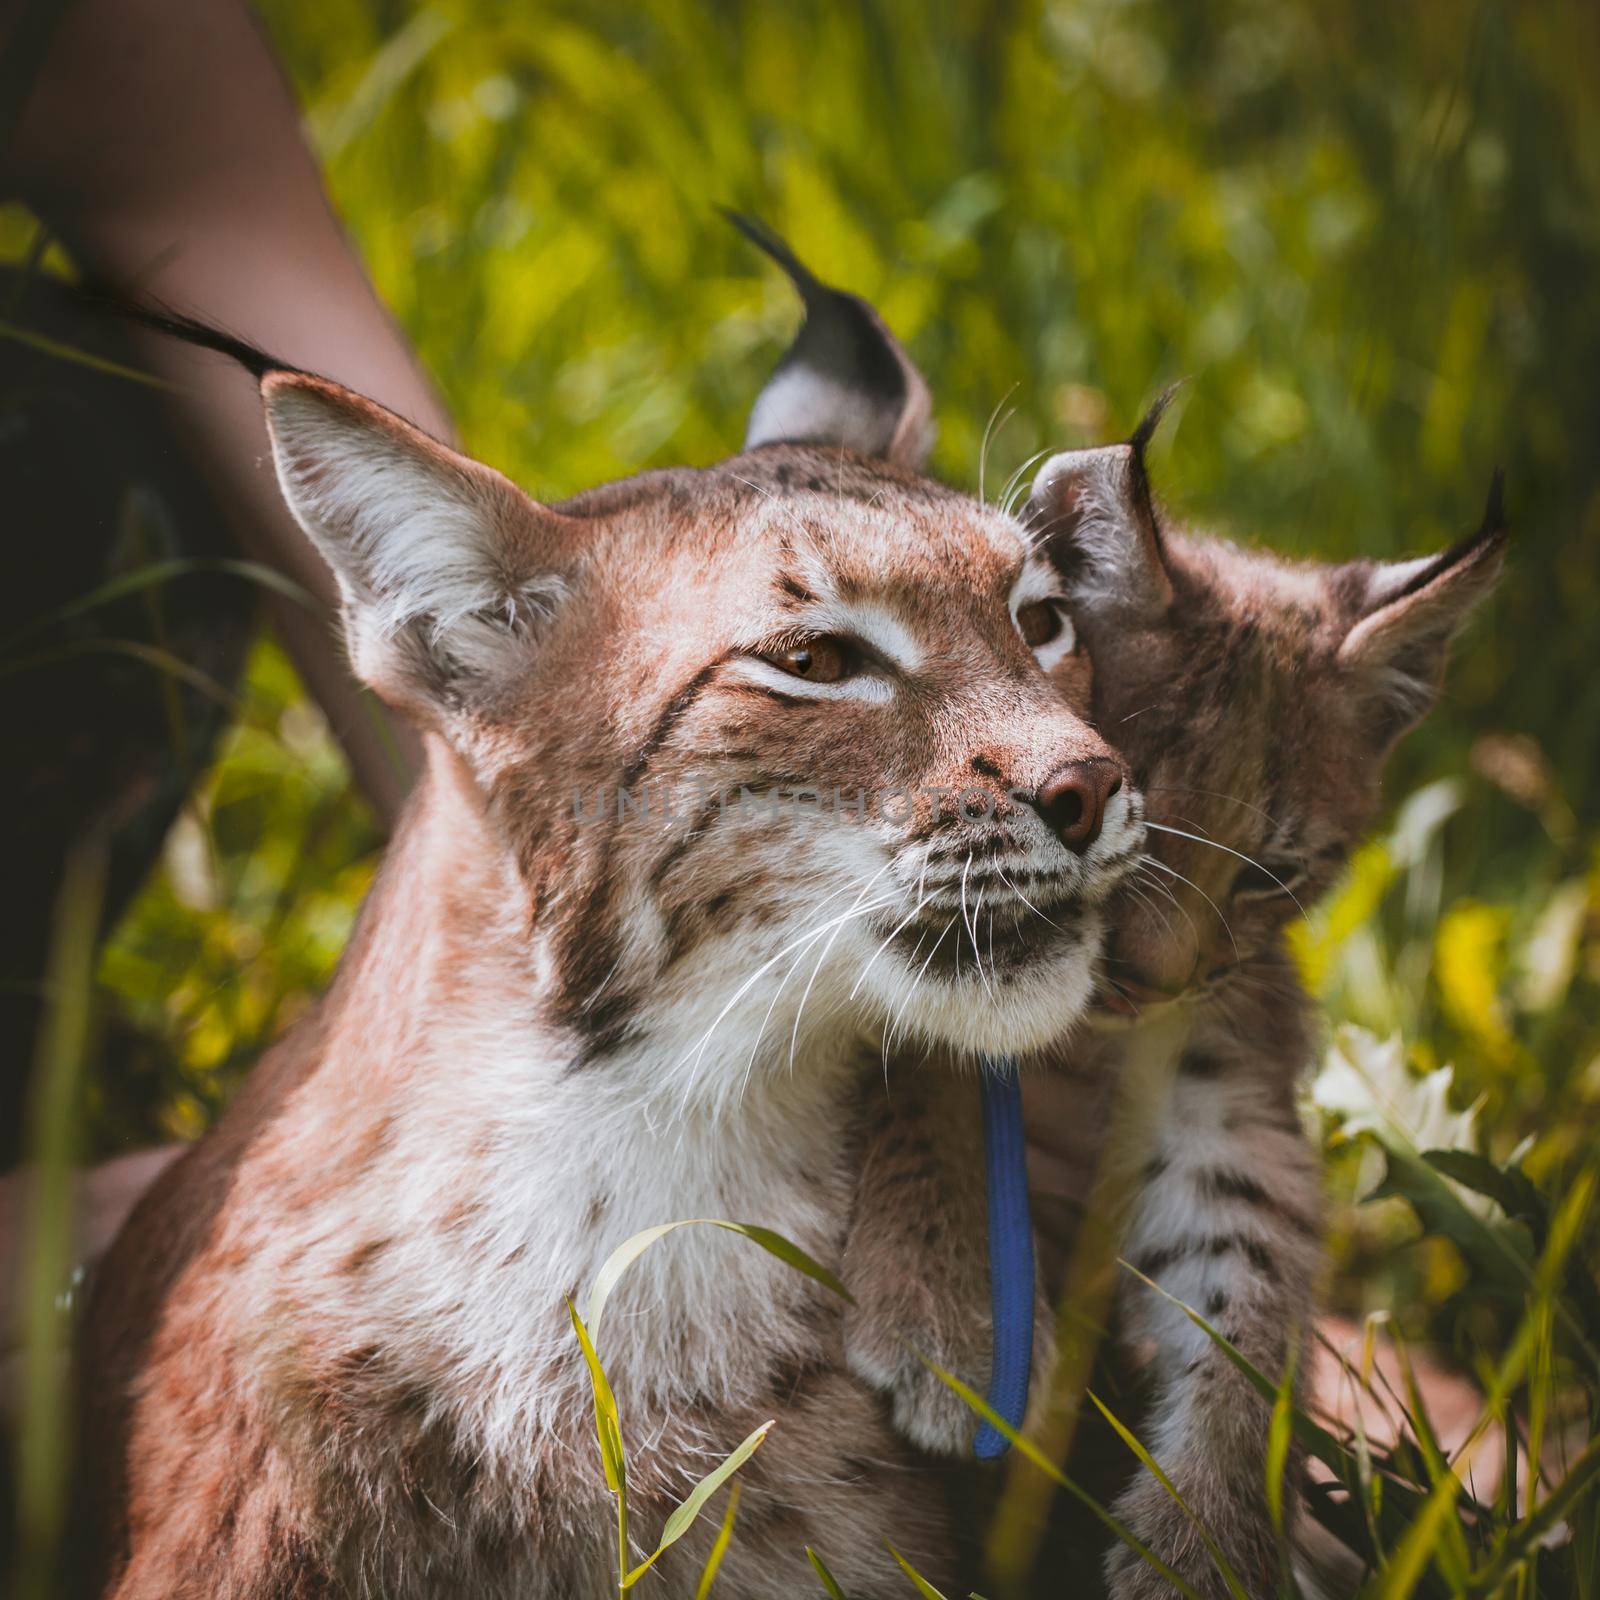 Adorable Eurasian Lynx with cub, portrait at summer field by RosaJay